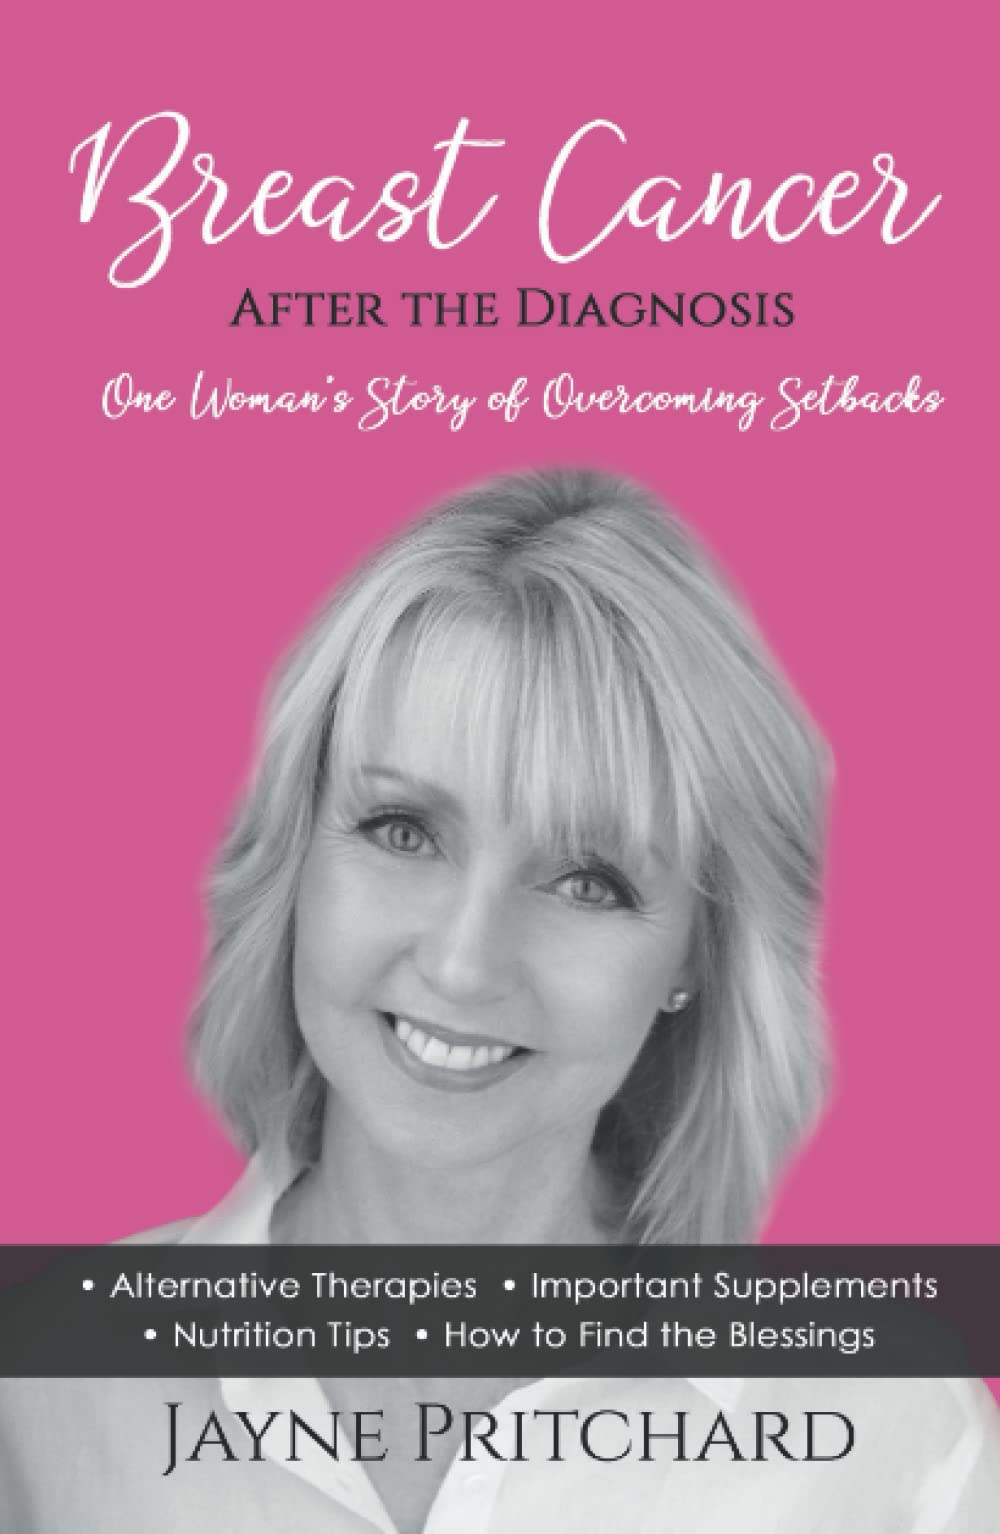 Breast Cancer - After the Diagnosis: One Woman's Story of Overcoming Setbacks